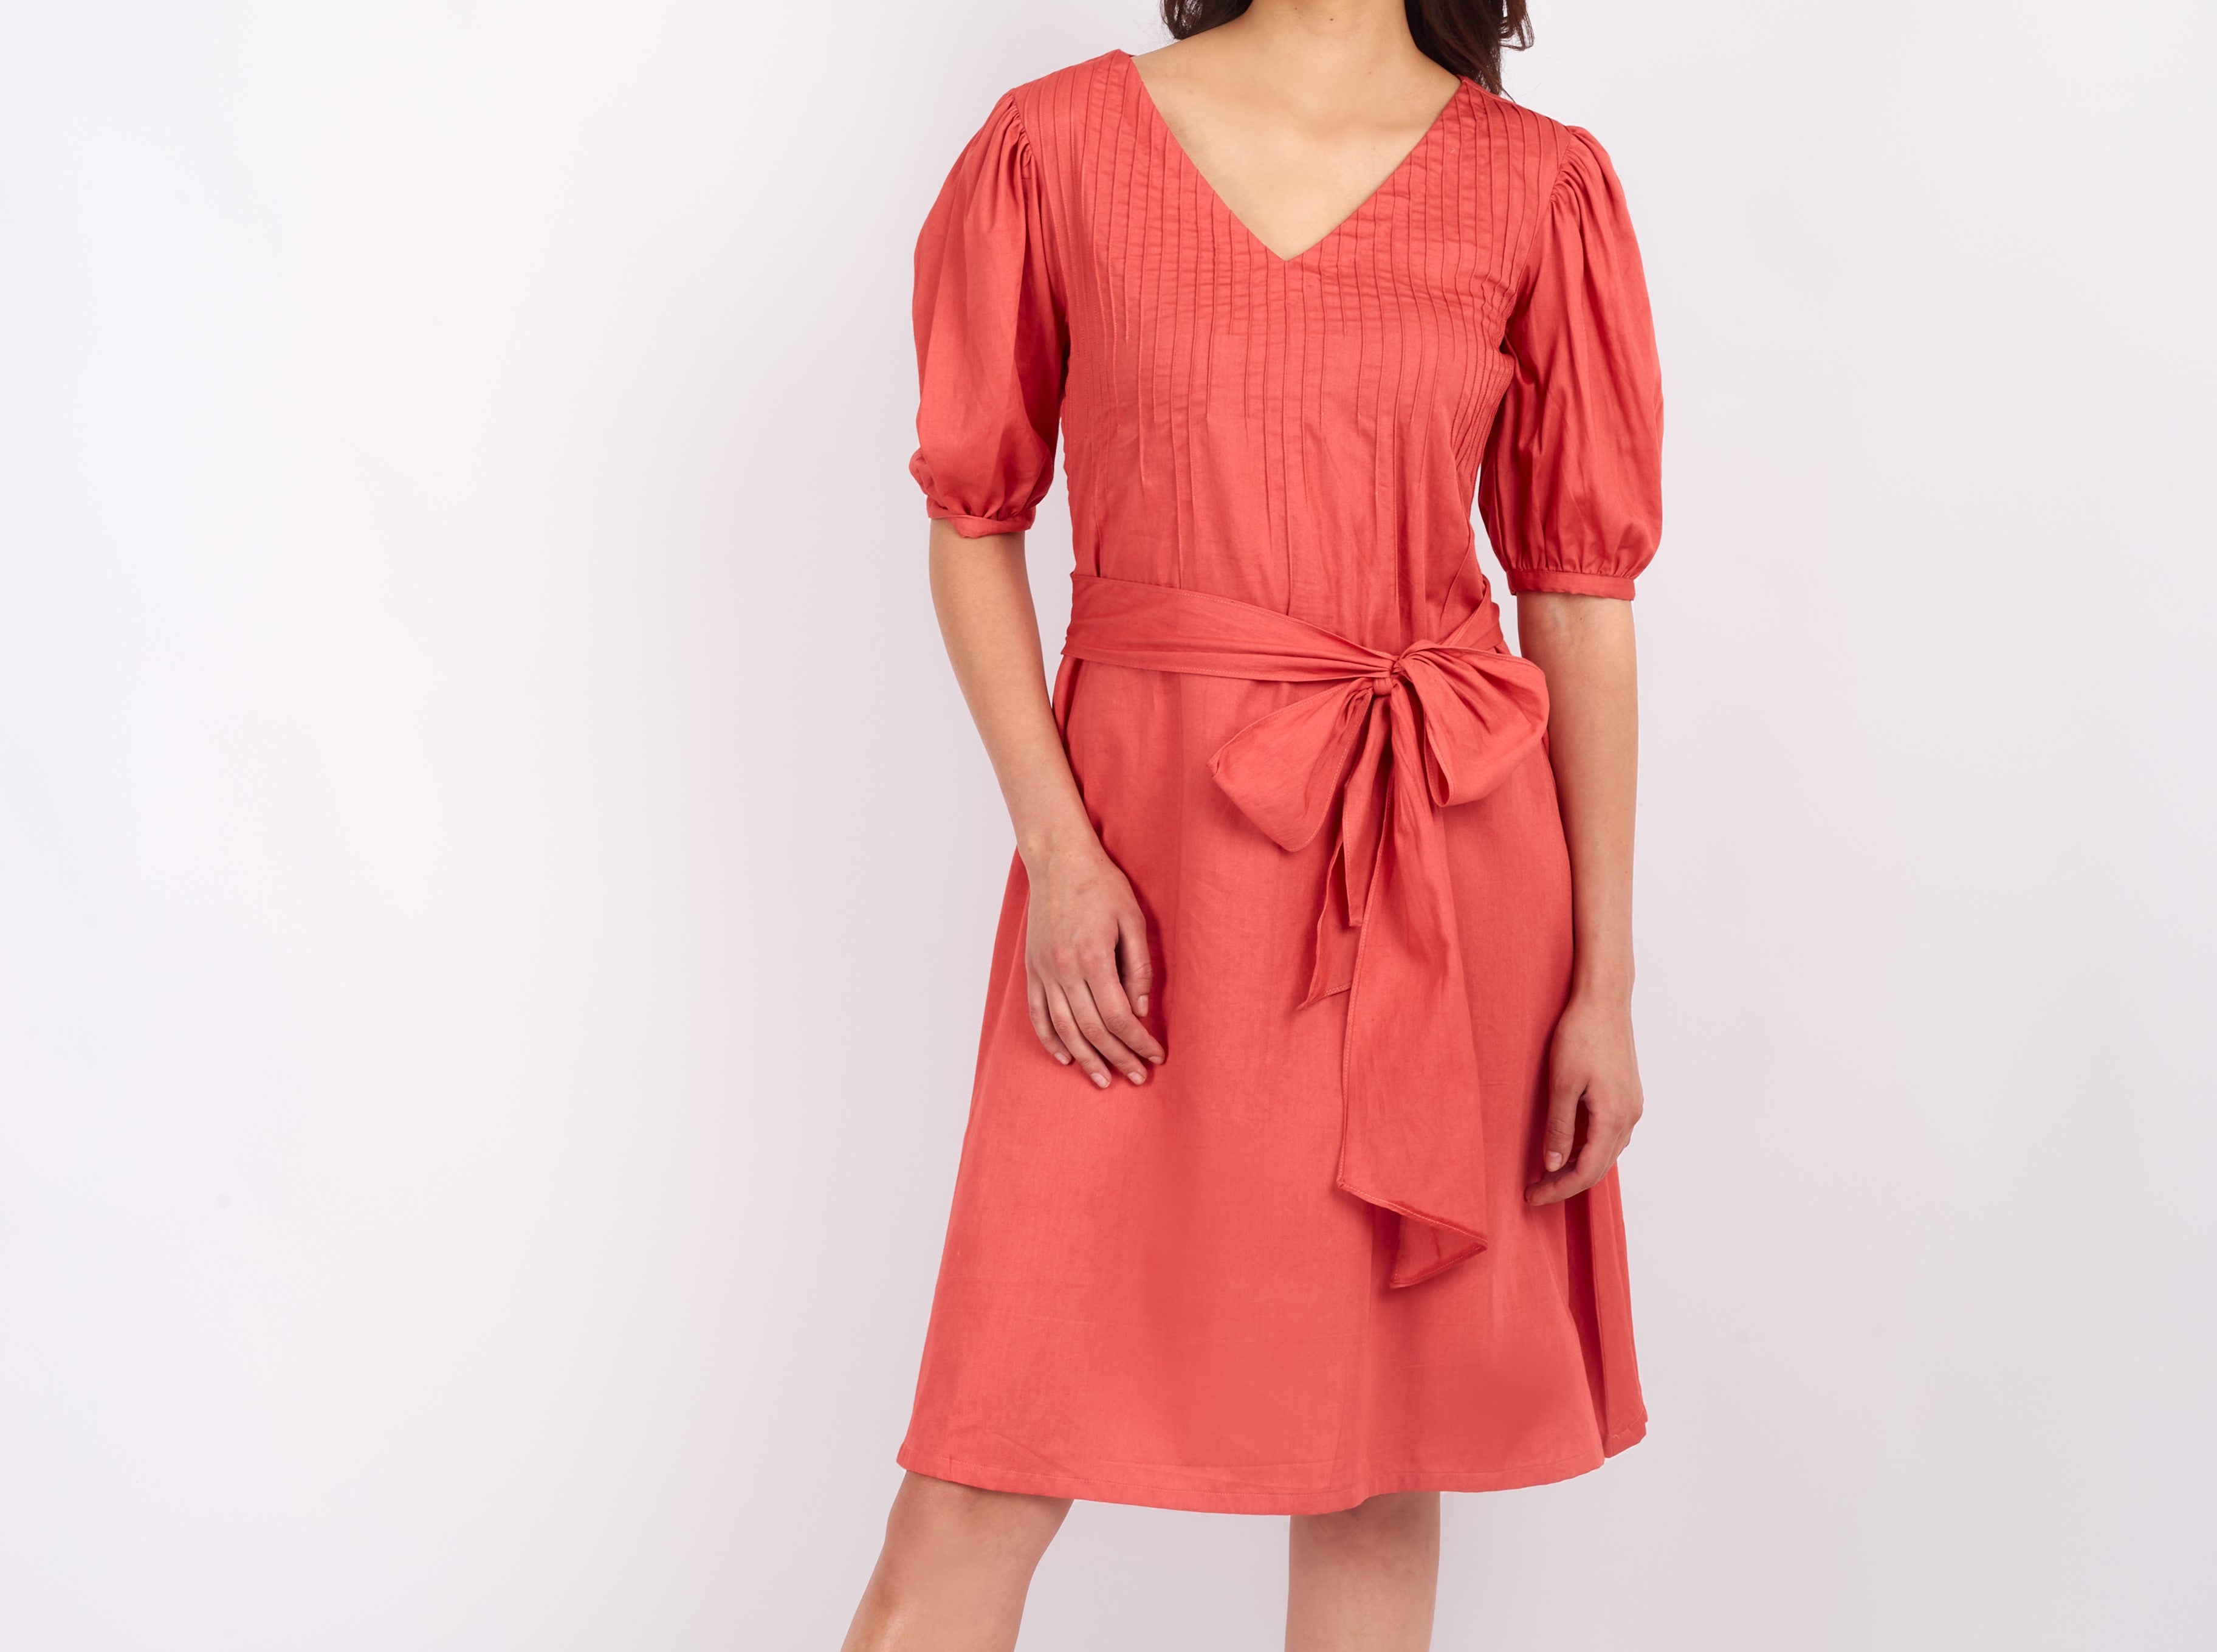 Solid Bow Belt Red Dress